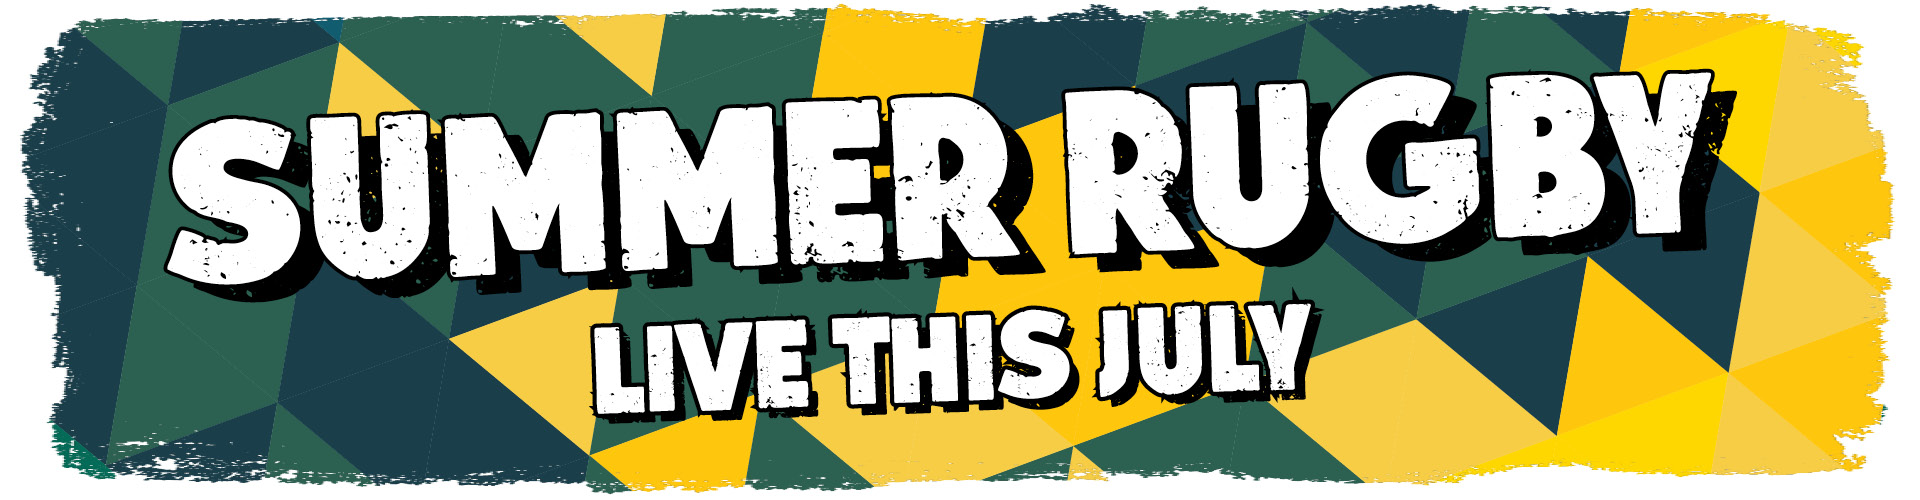 Summer Rugby - Live This July